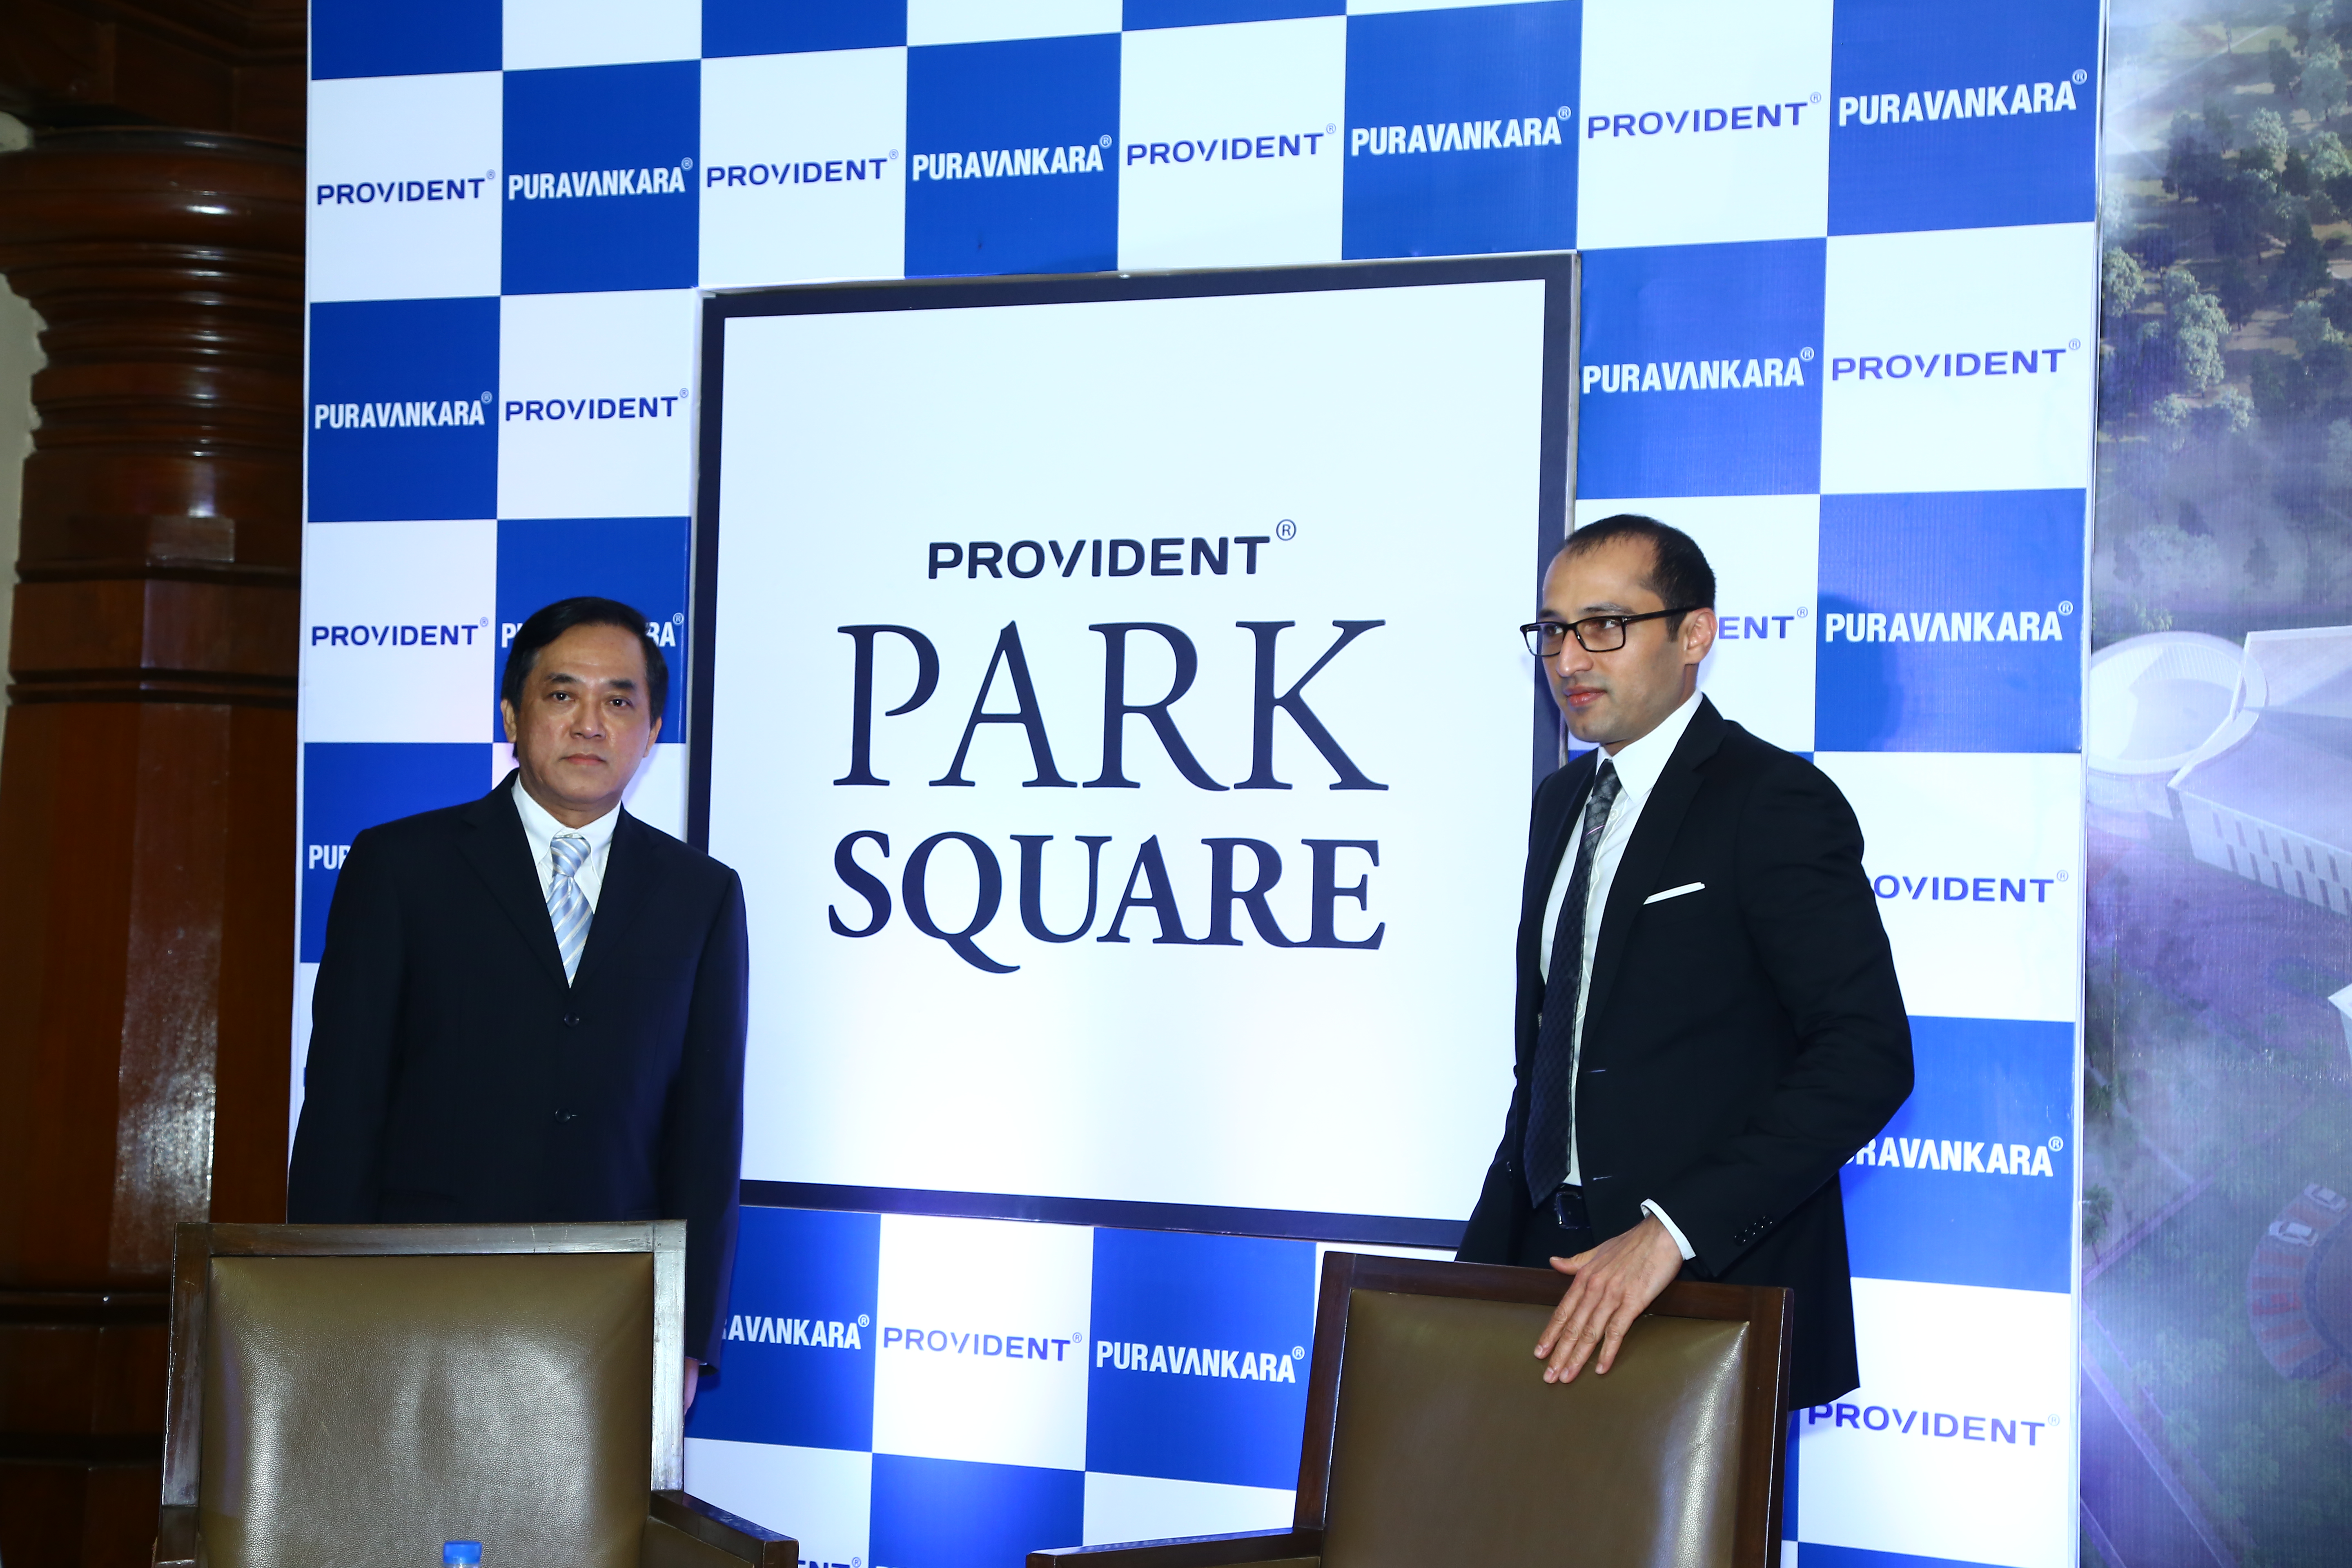 Provident Park Square, Puravankara, Ashish Puravankara, Puravankara affordable housing, Provident housing, IPO style home selling, India real estate news, Indian realty news, Real estate news India, Indian property market news, Investment in Bengaluru property, Track2Realty